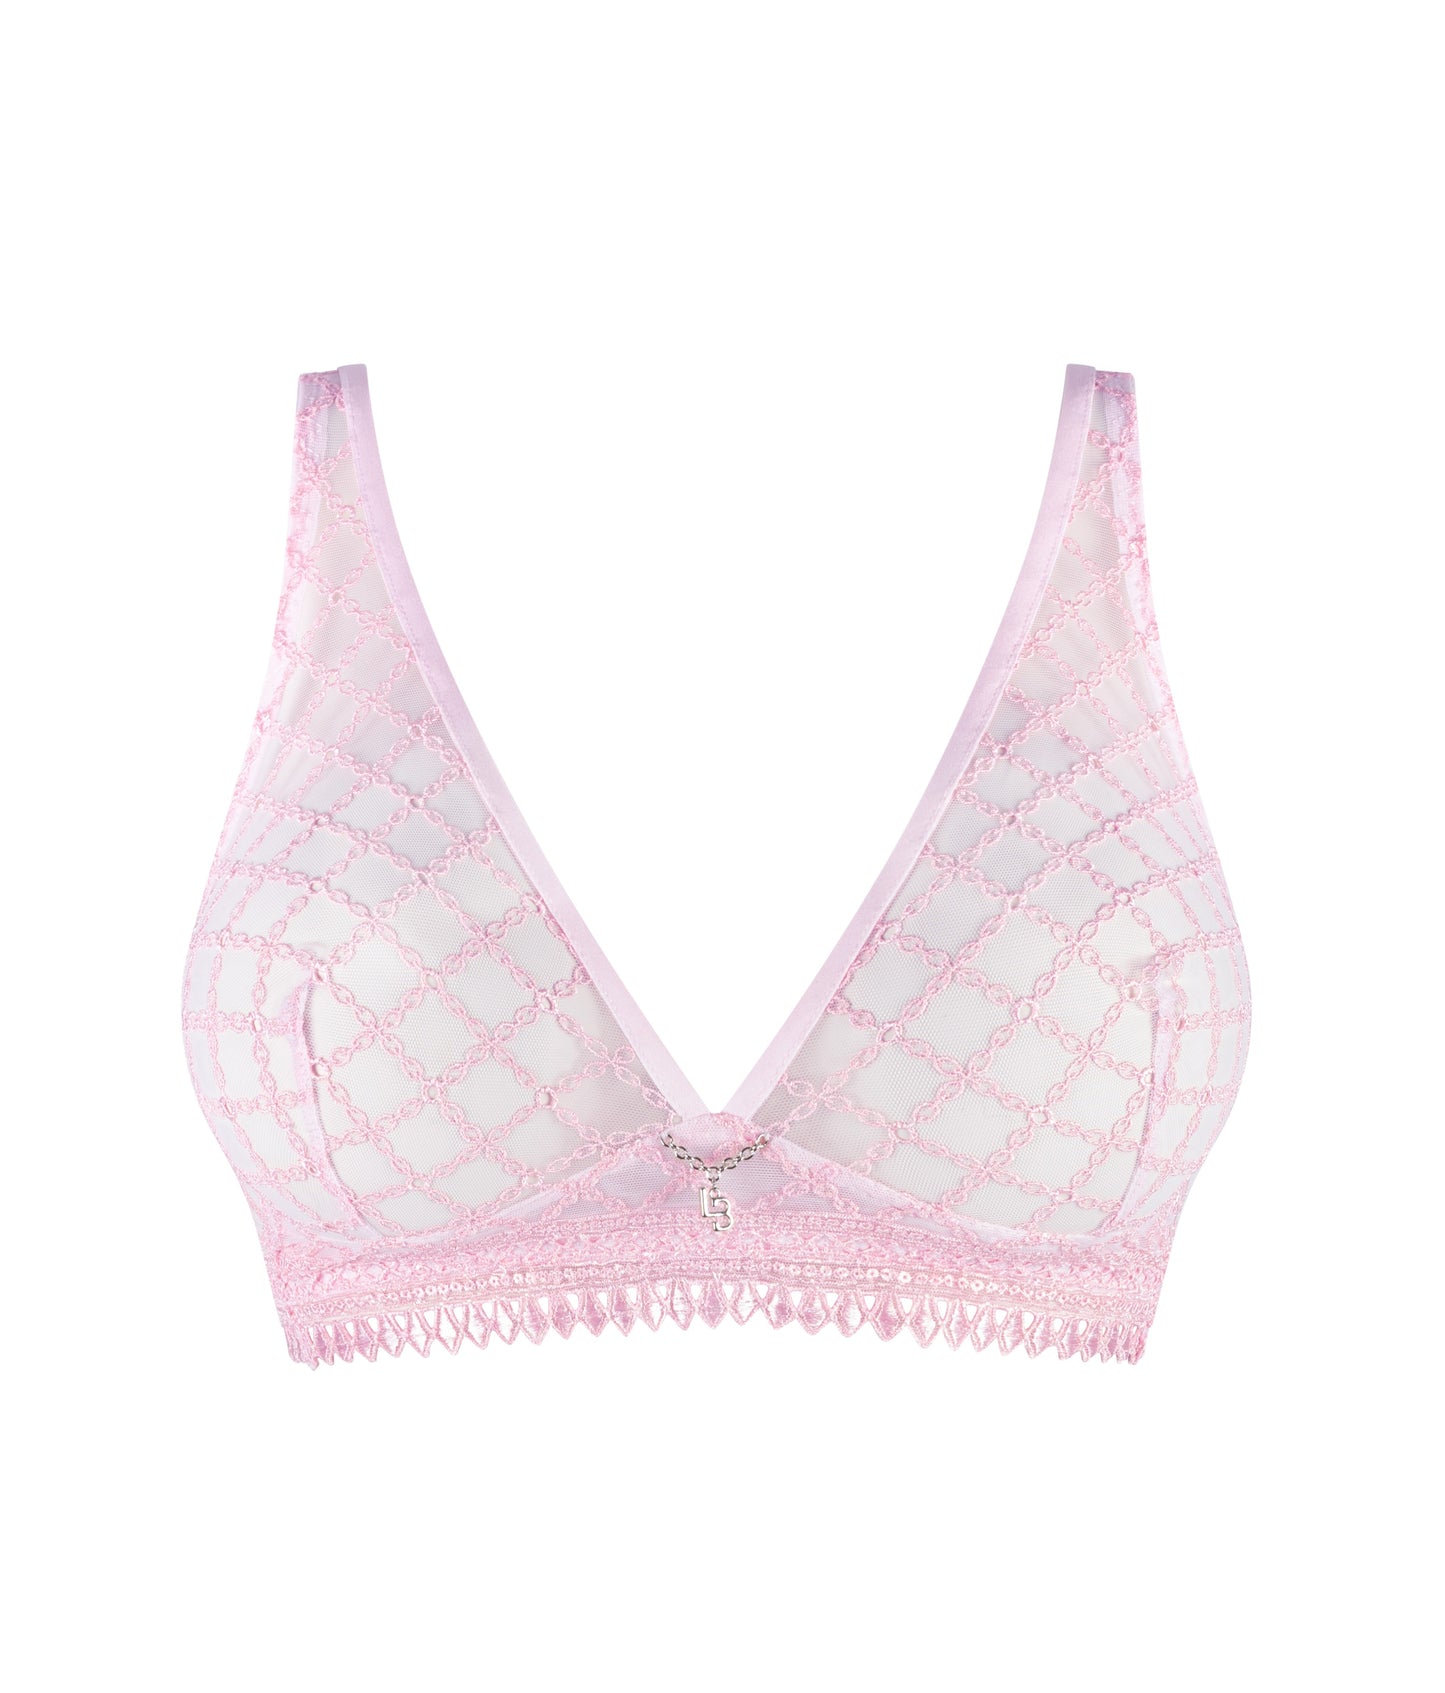 The Bralette from the Paco line showcases a captivating geometric embroidery. The intricate chain and link pattern is delicately stitched onto a sheer tulle fabric, artfully emphasizing curves and elegantly exposing the skin.